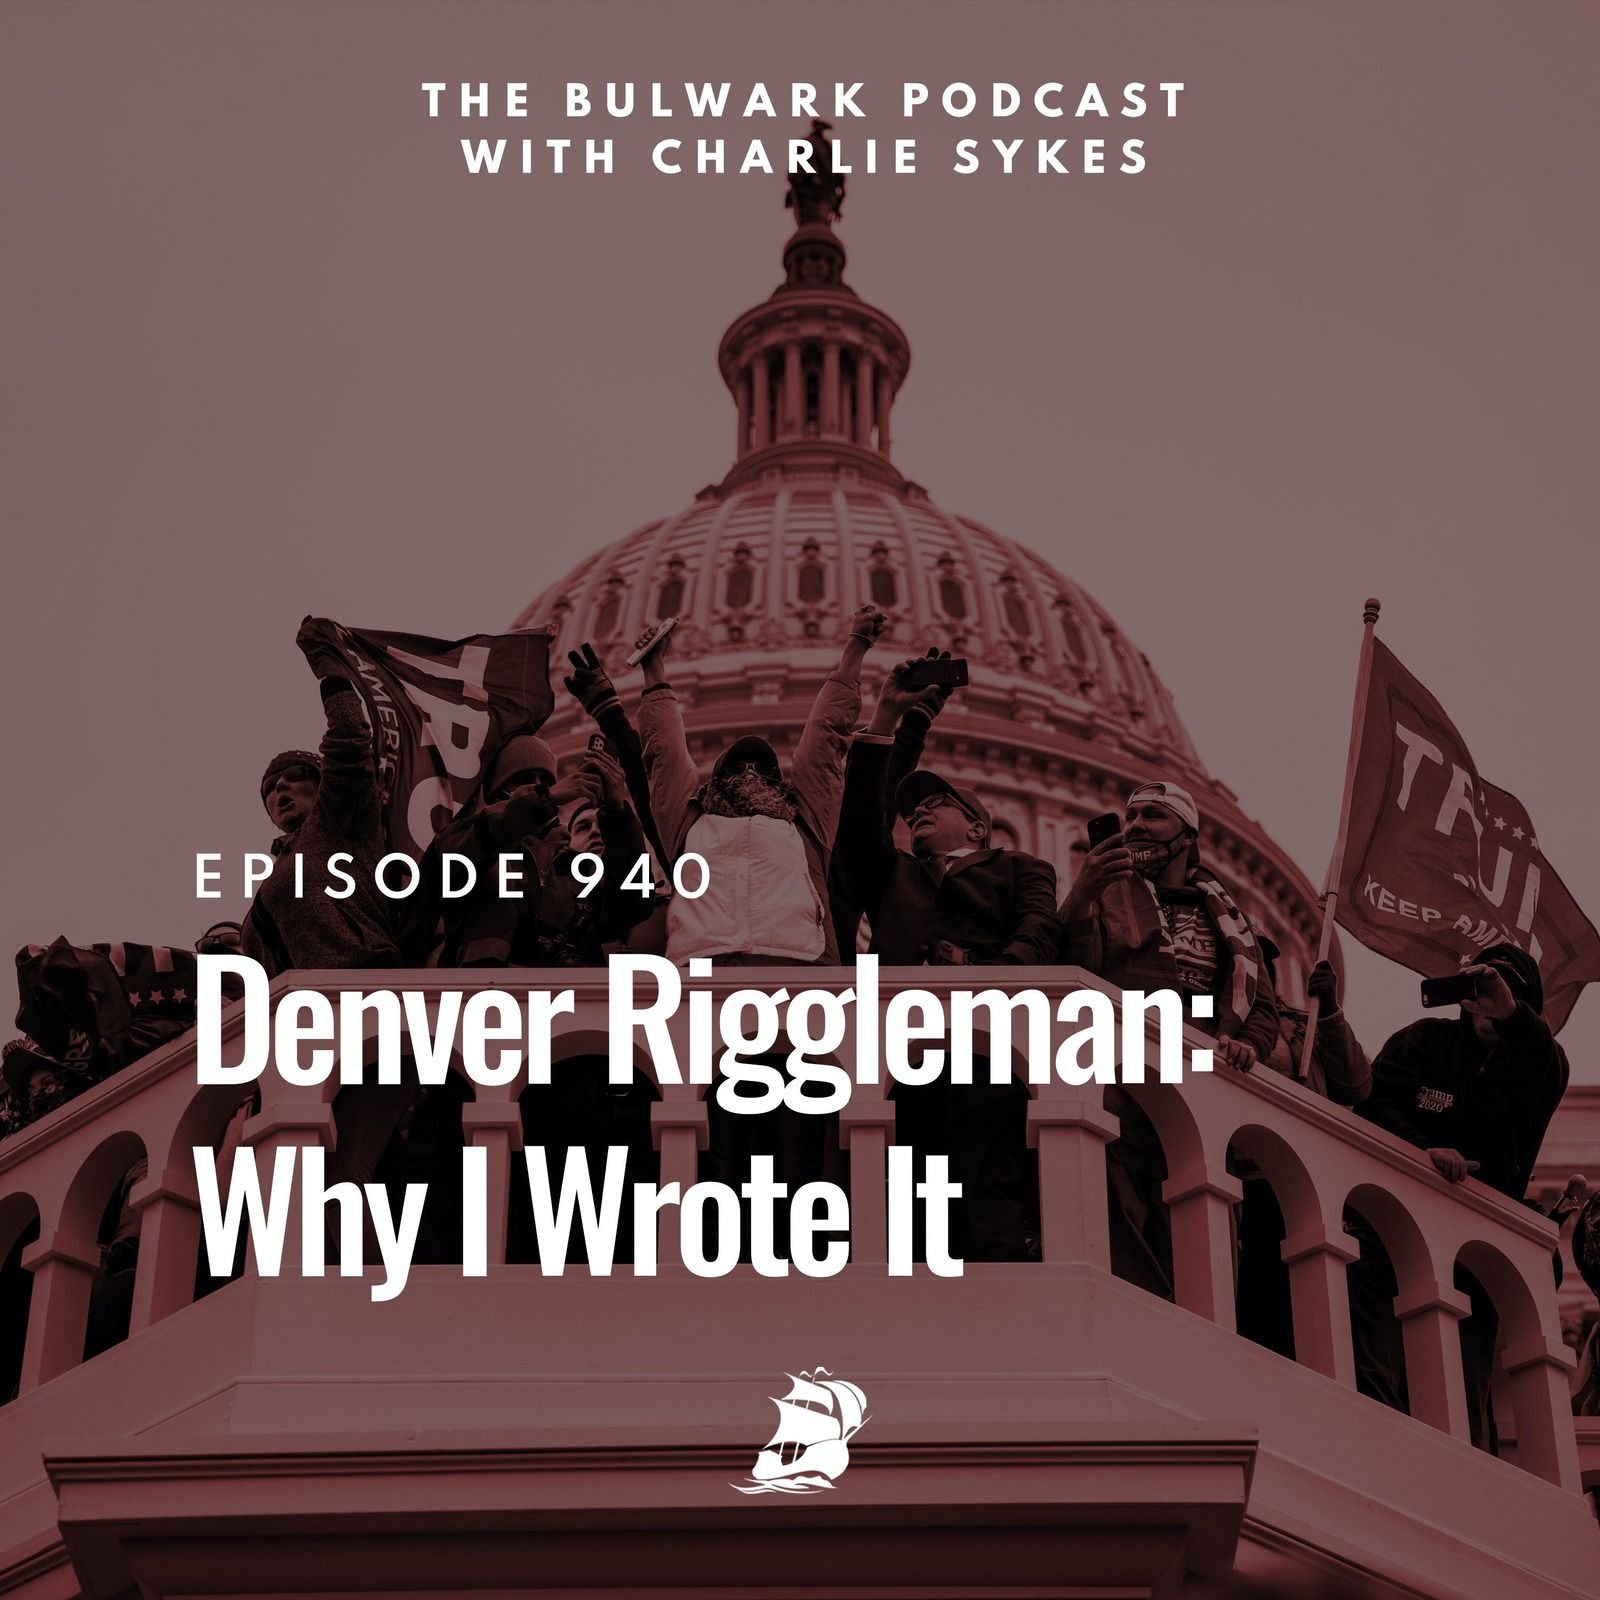 Denver Riggleman: Why I Wrote It